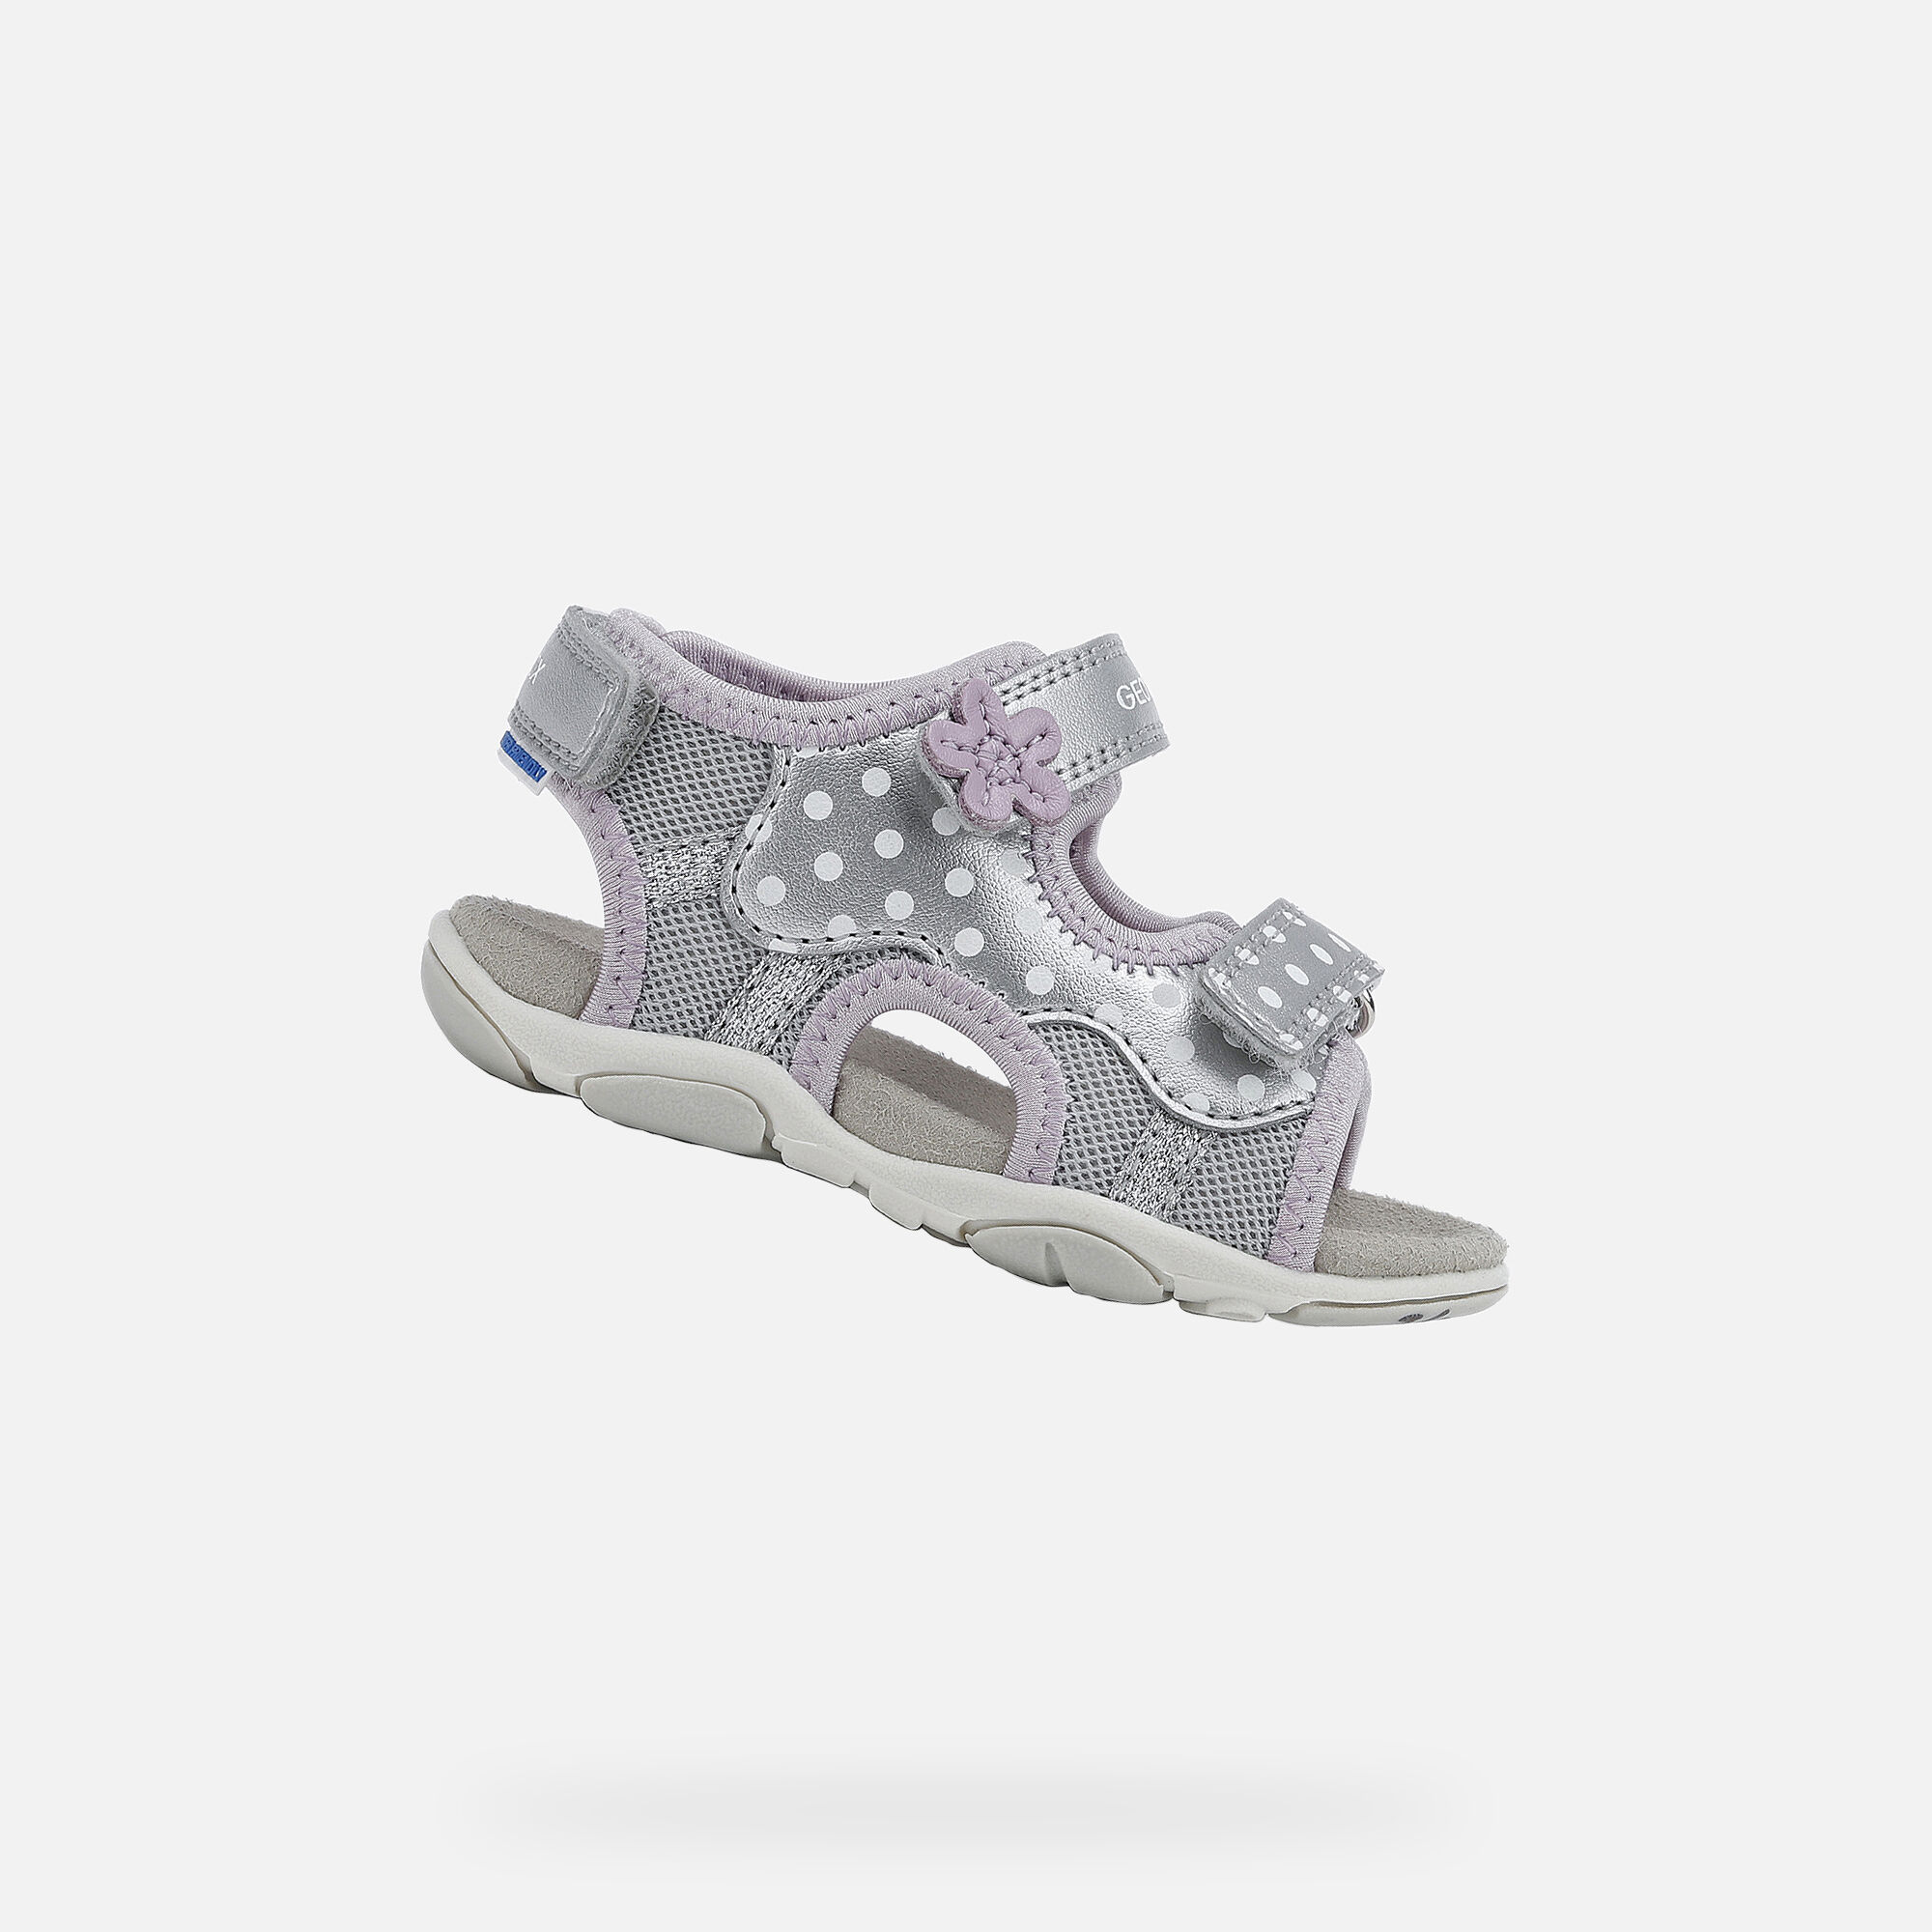 silver sandals baby girl